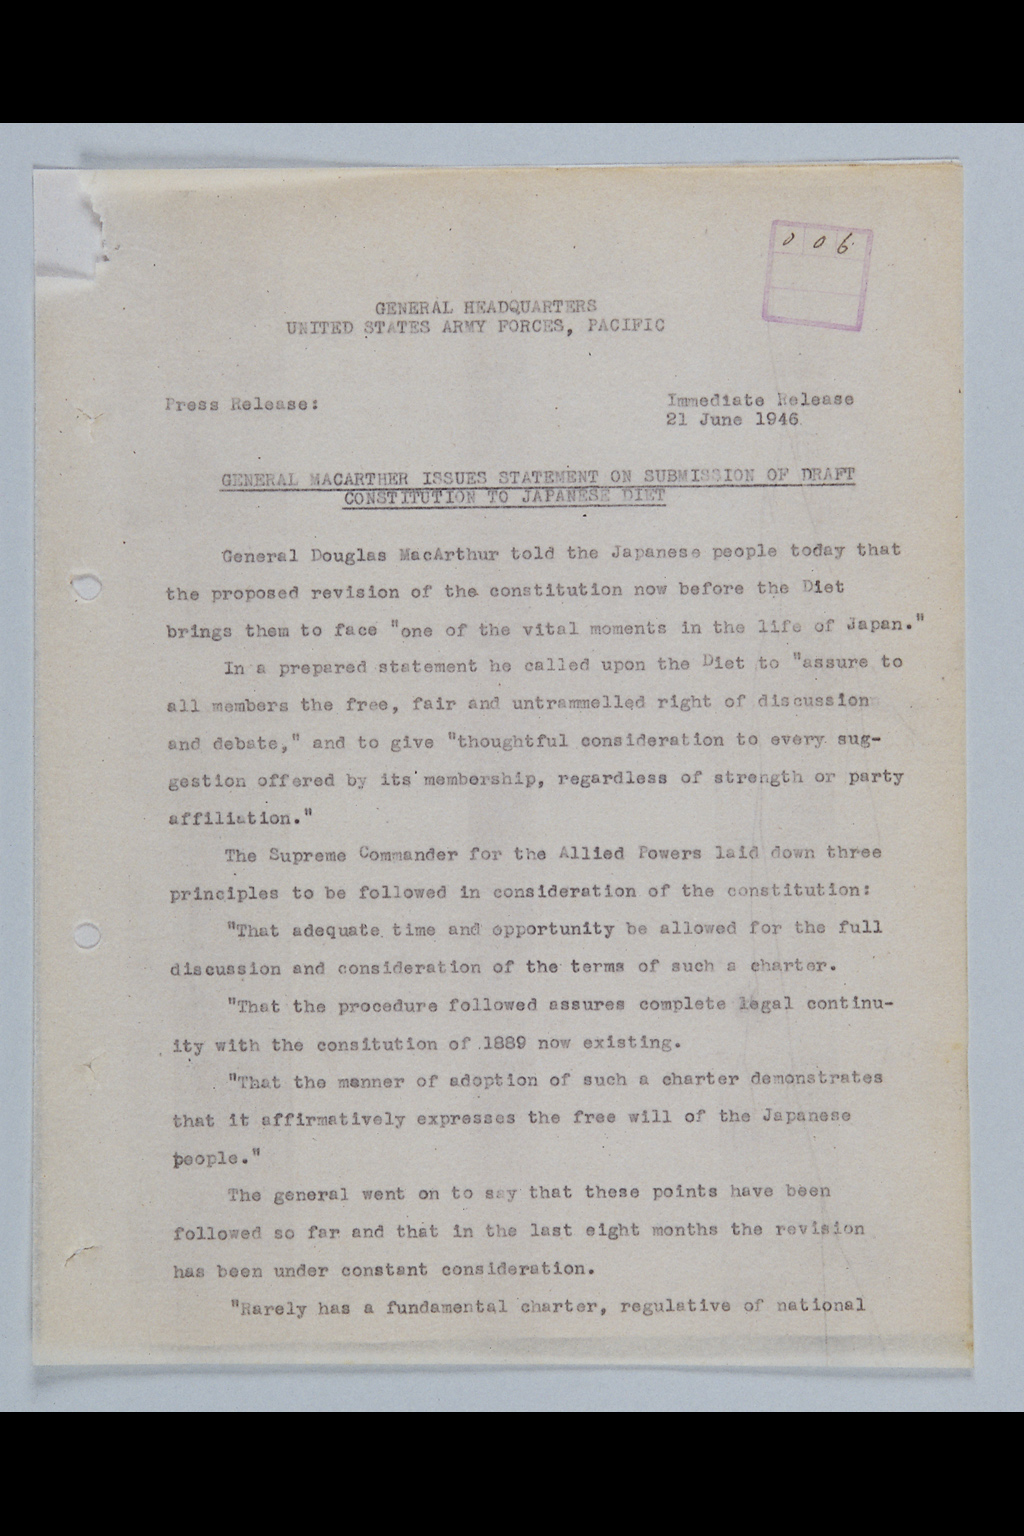 『Press Release: General MacArthur Issues Statement on Submission of Draft Constitution to Japanese Diet』(拡大画像)